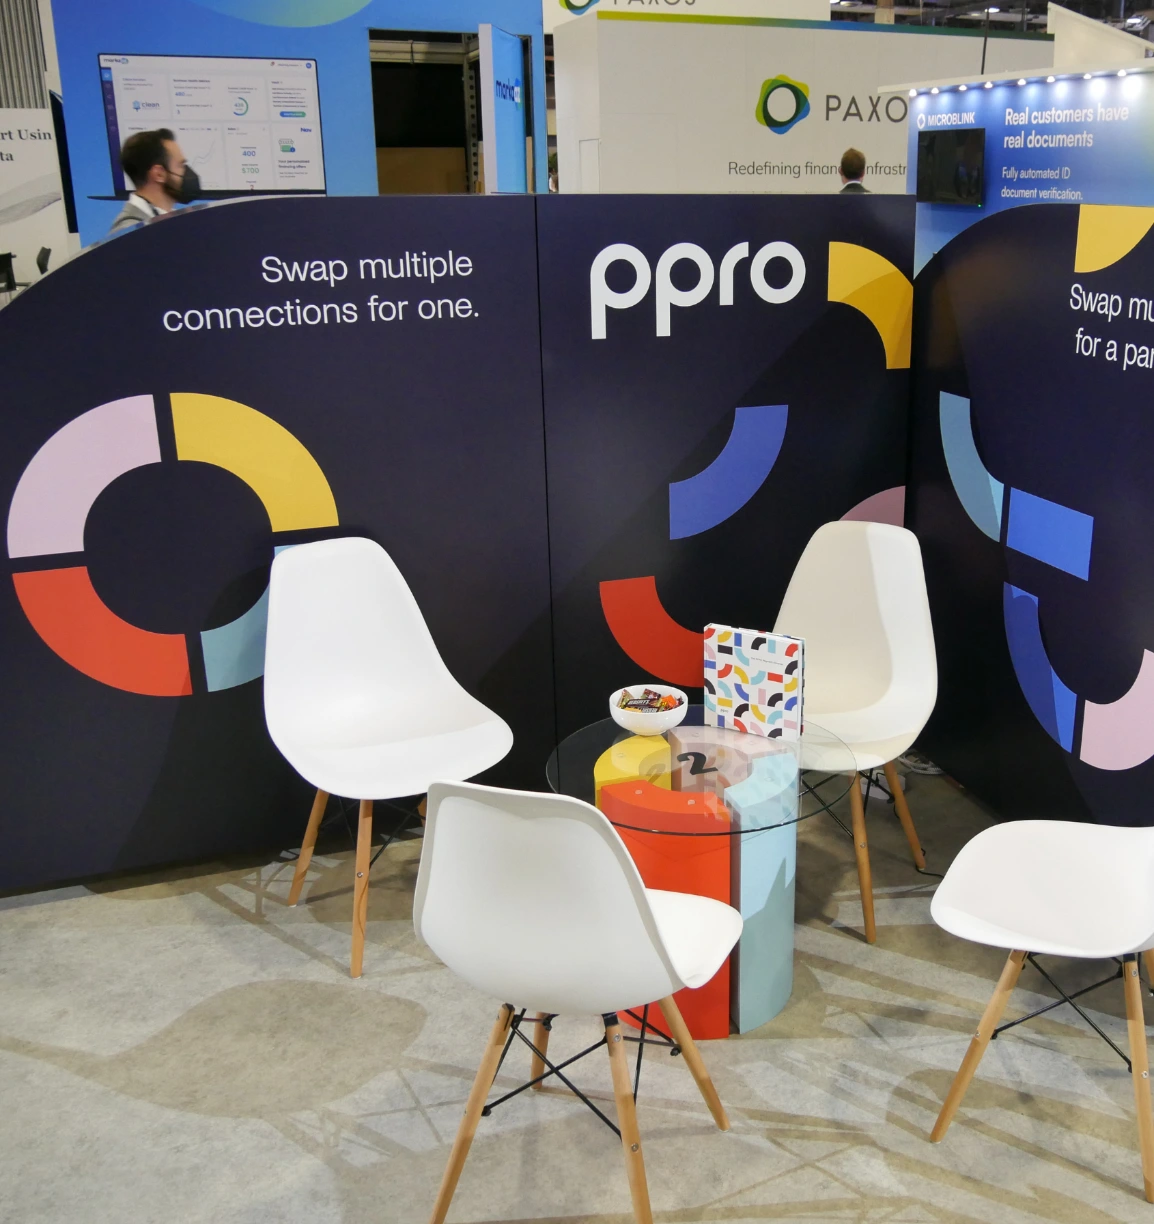 Custom exhibits for ppro at money 20/20 in Las Vegas